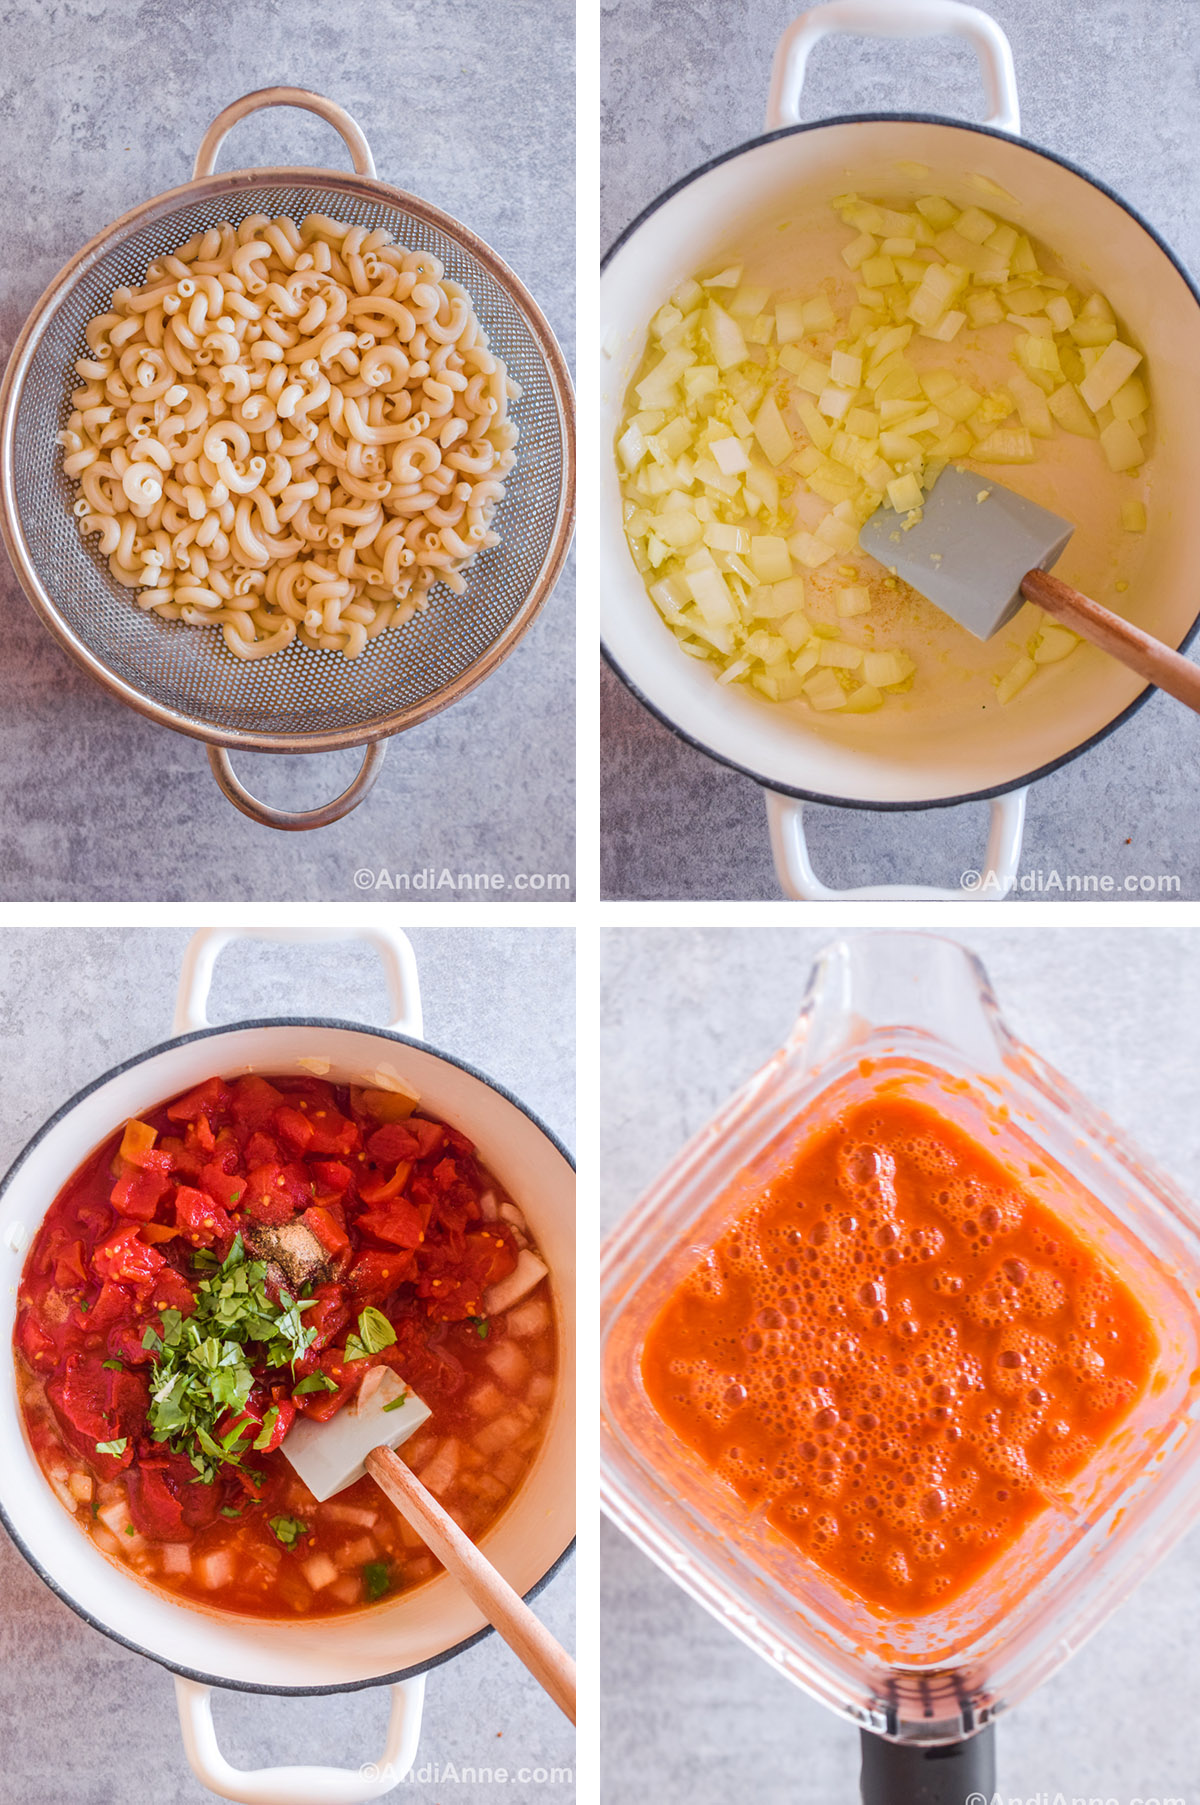 Four images showing steps to make the recipe including strainer with cooked pasta, a pot of cooked onions and spatula, a pot with diced tomatoes, onion and chopped basil in liquid, and a blender with red tomato soup liquid inside.